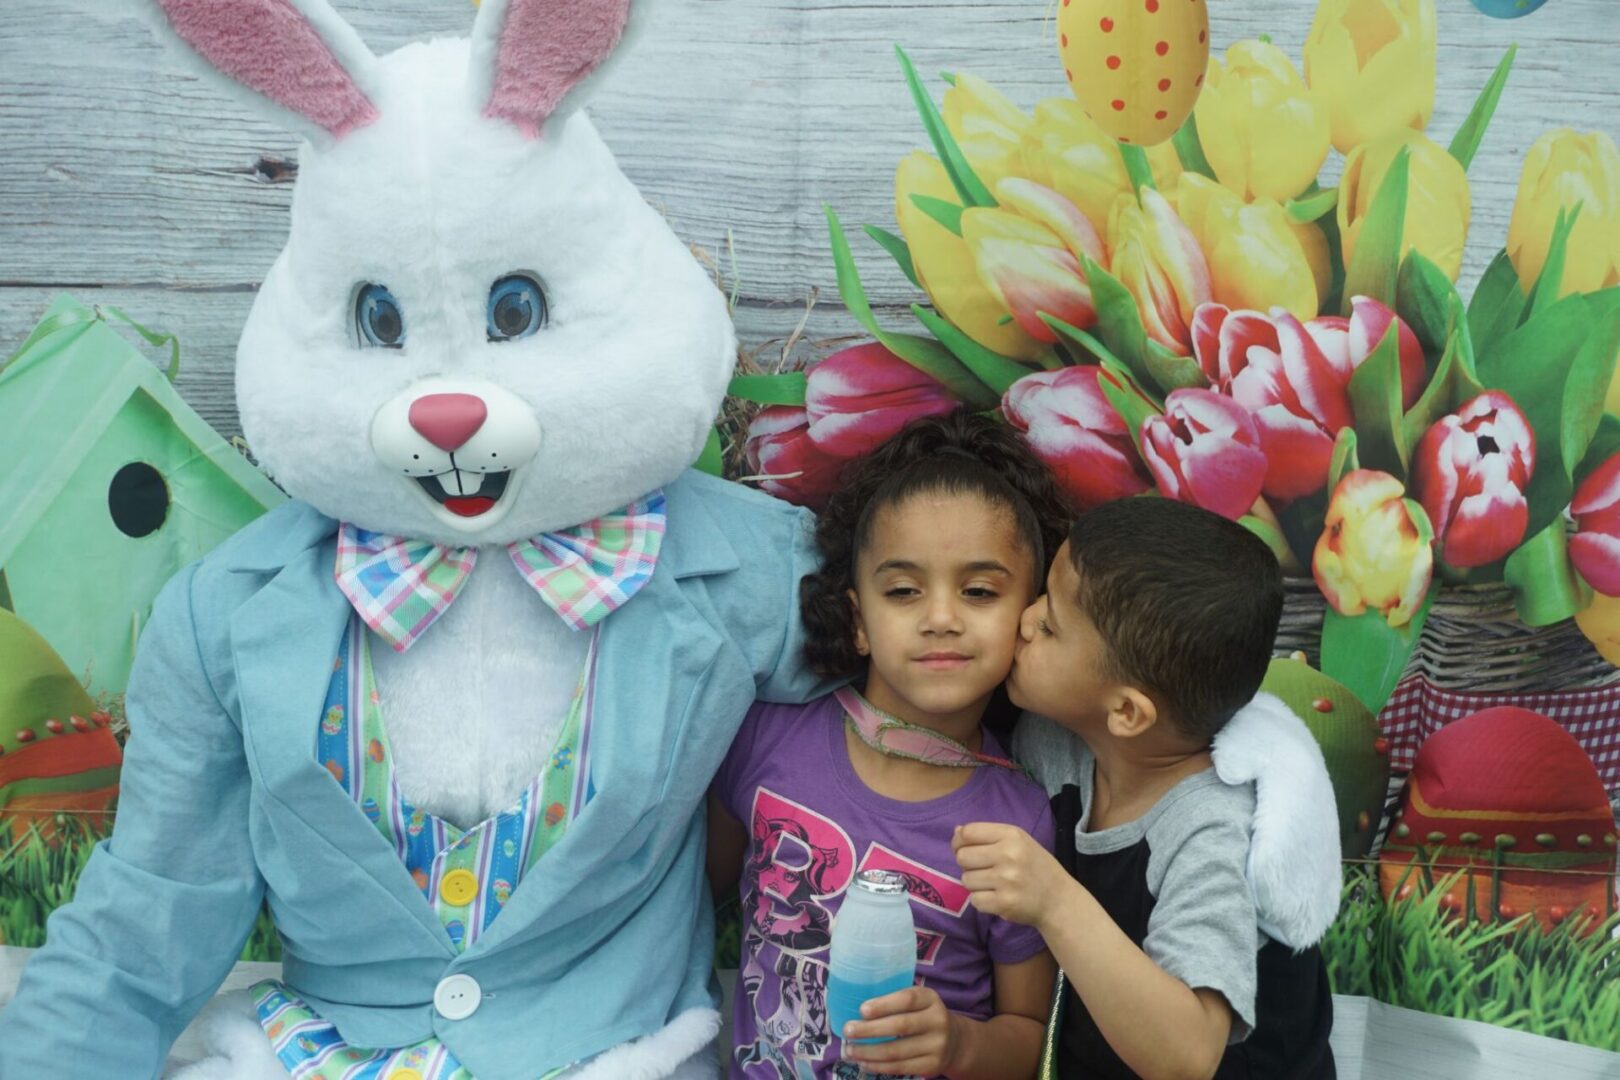 The bunny mascot together with a girl holding a drink and a boy kissing the girl on the cheek (1)